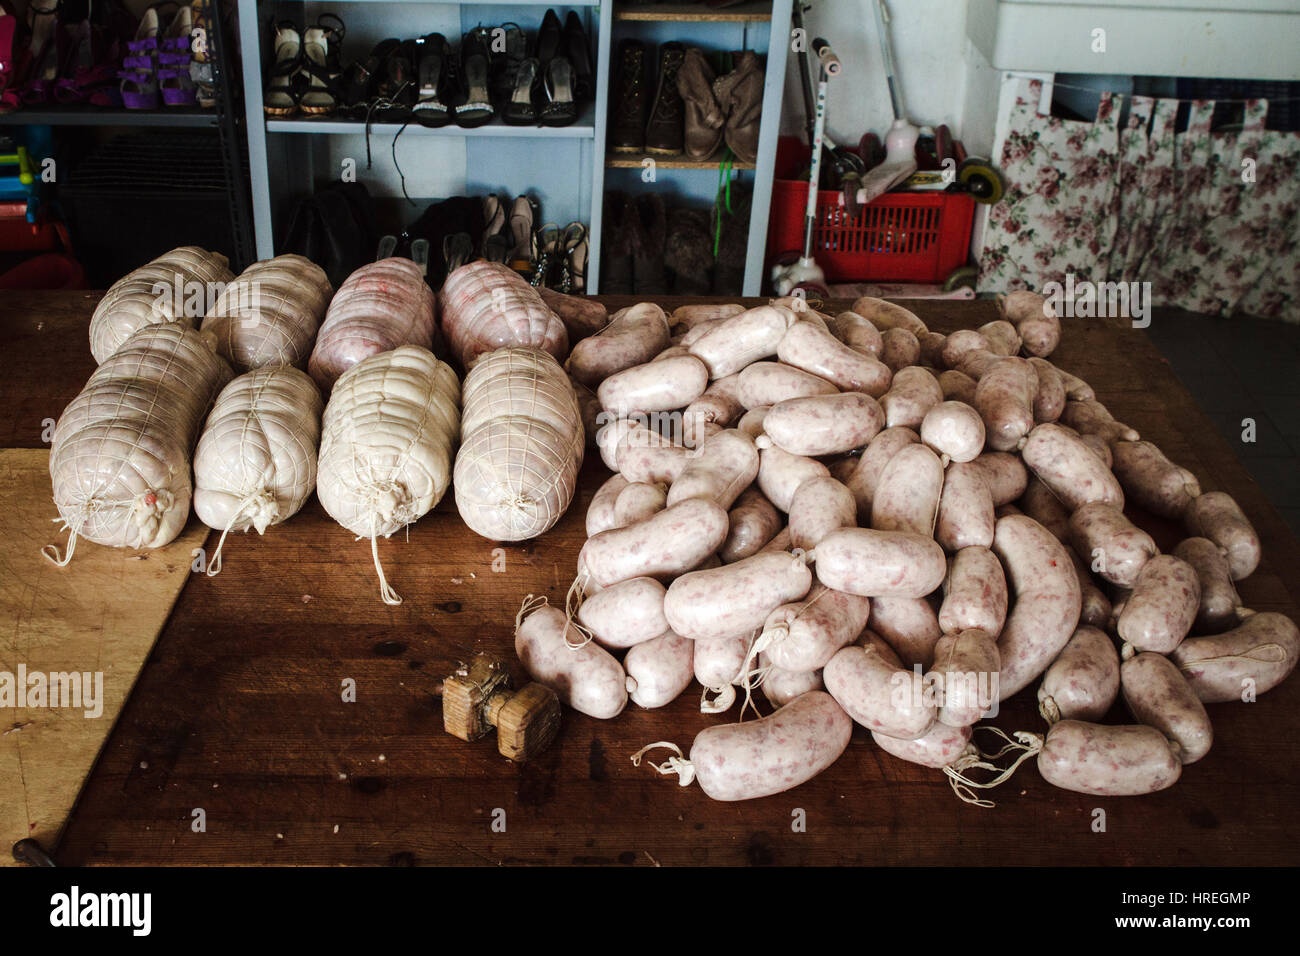 Sausage making in a slaughterhouse in Alba, which is located in the province of Piedmont, Italy. Stock Photo